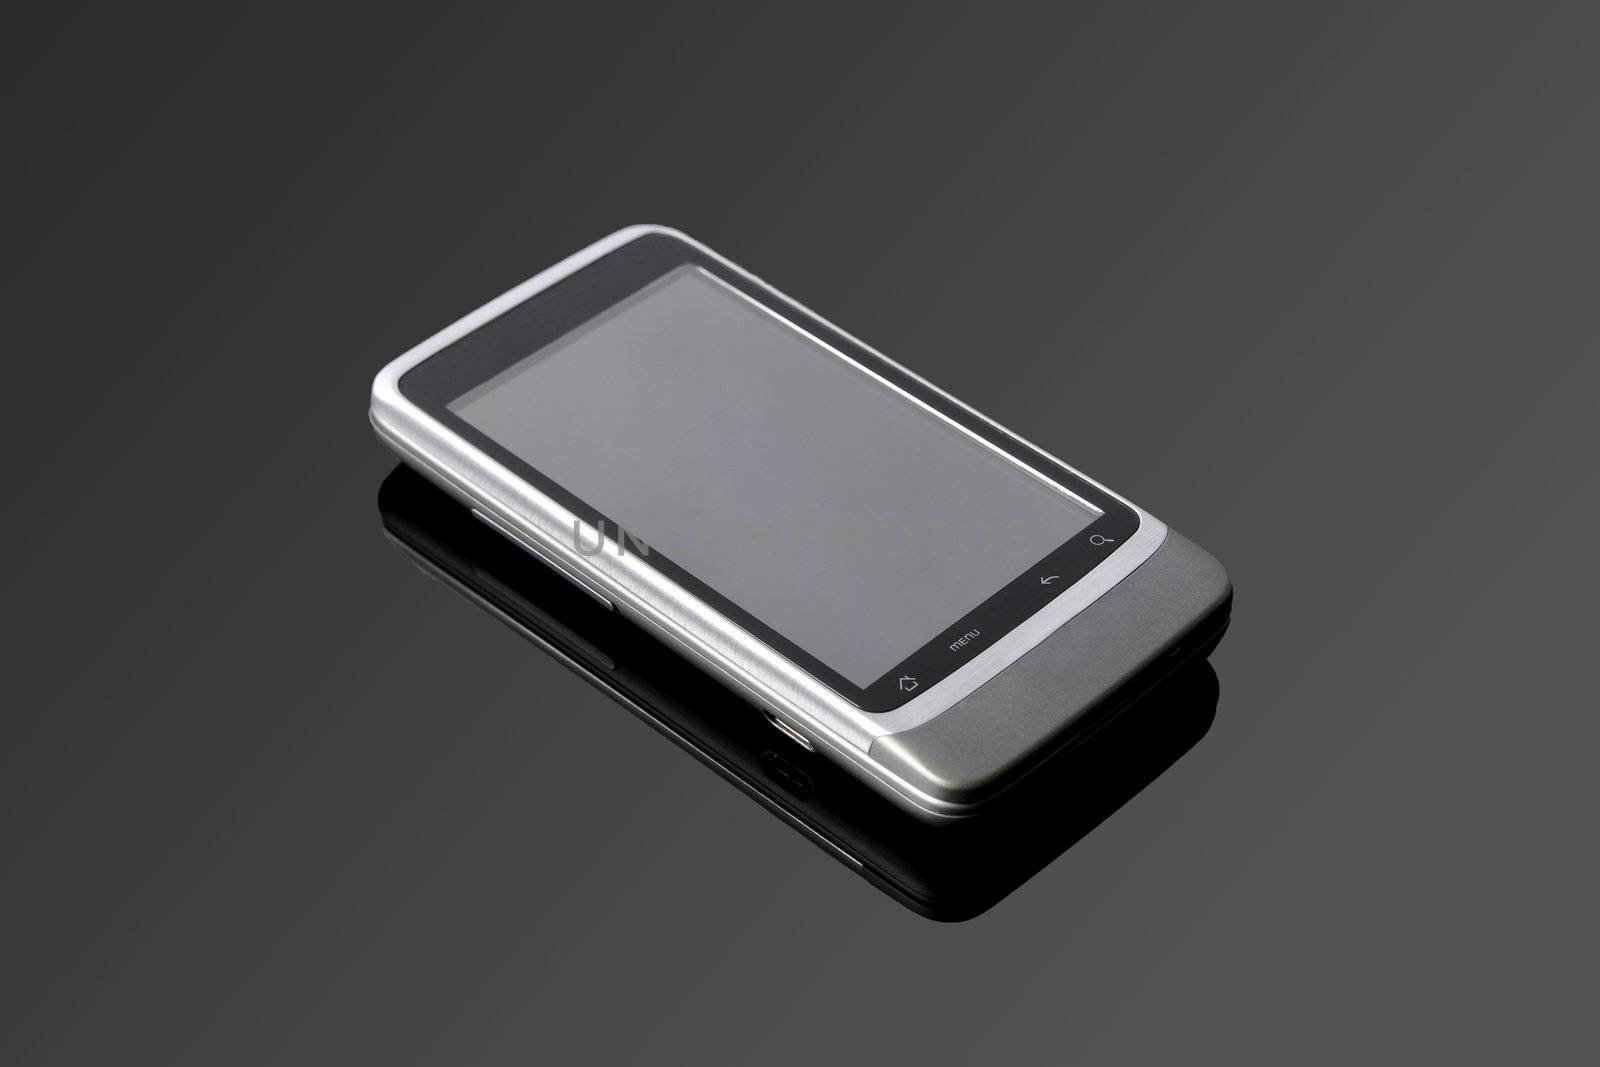 An Android mobile phone on a black glass table